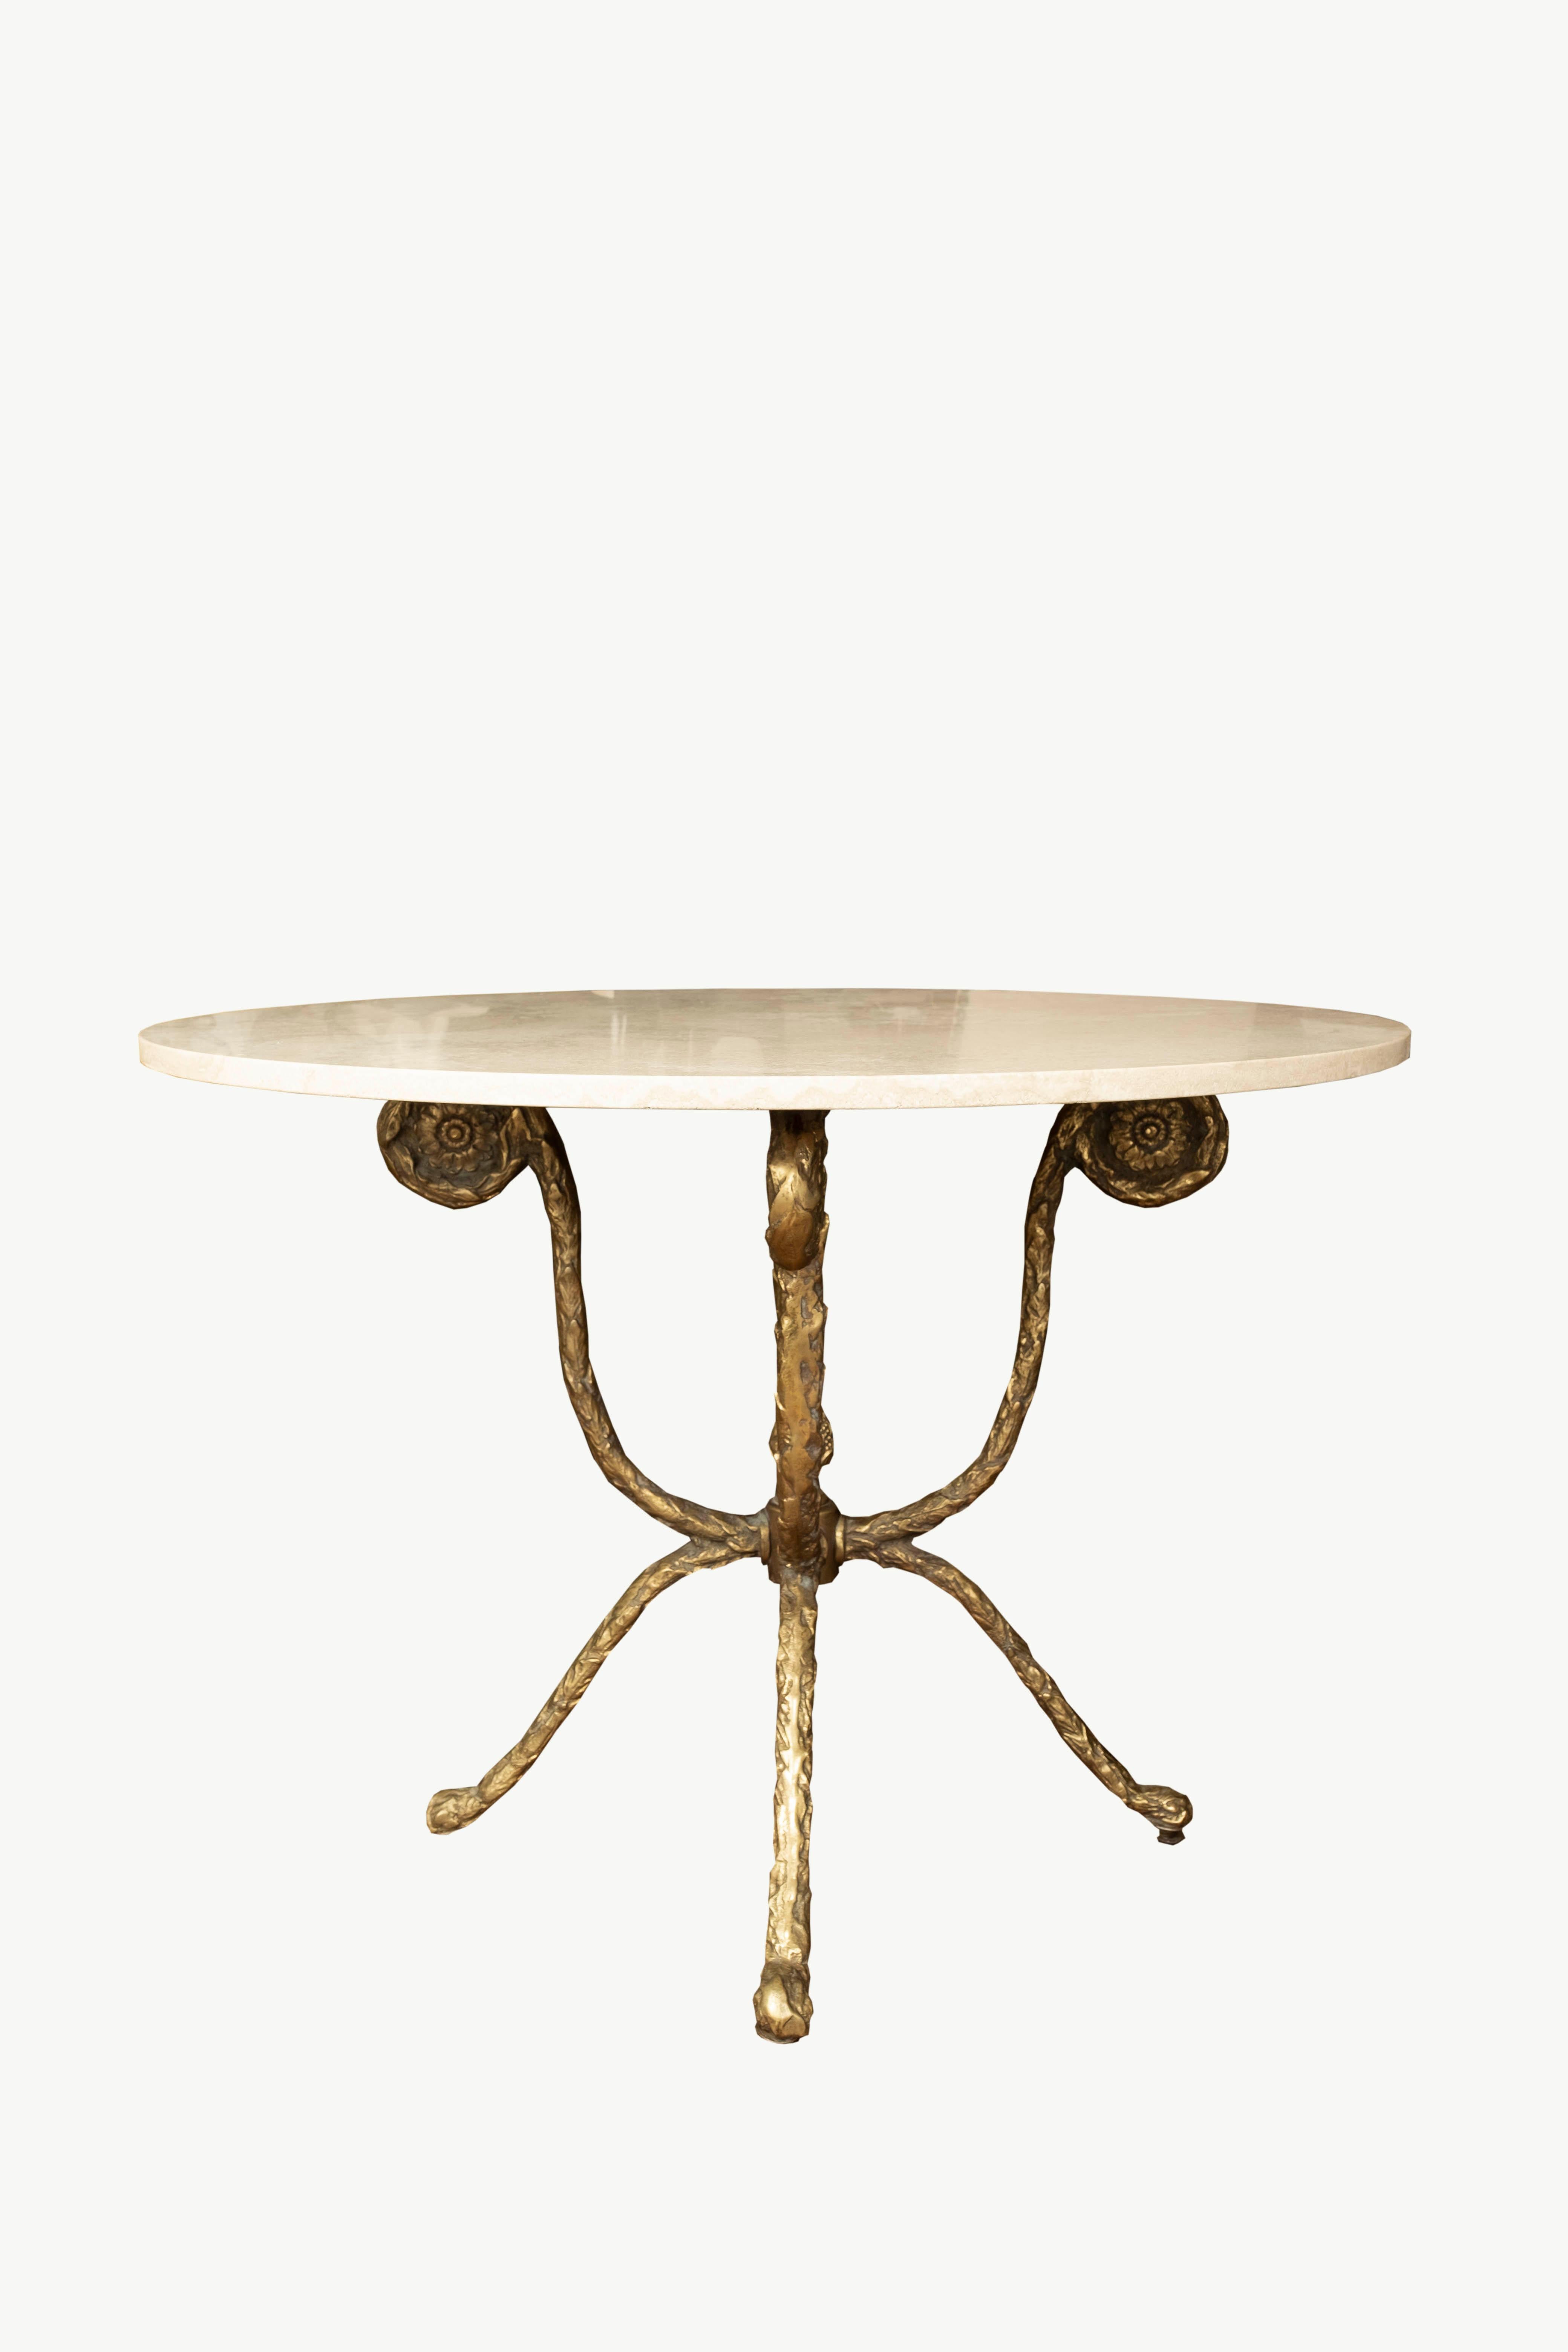 Italian Modern bronze and Travertine center table attributed to Romeo Rega. This fabulous sculptural Italian Neoclassical style table could be used as a side table, end table, game table, dining table or breakfast table.
 